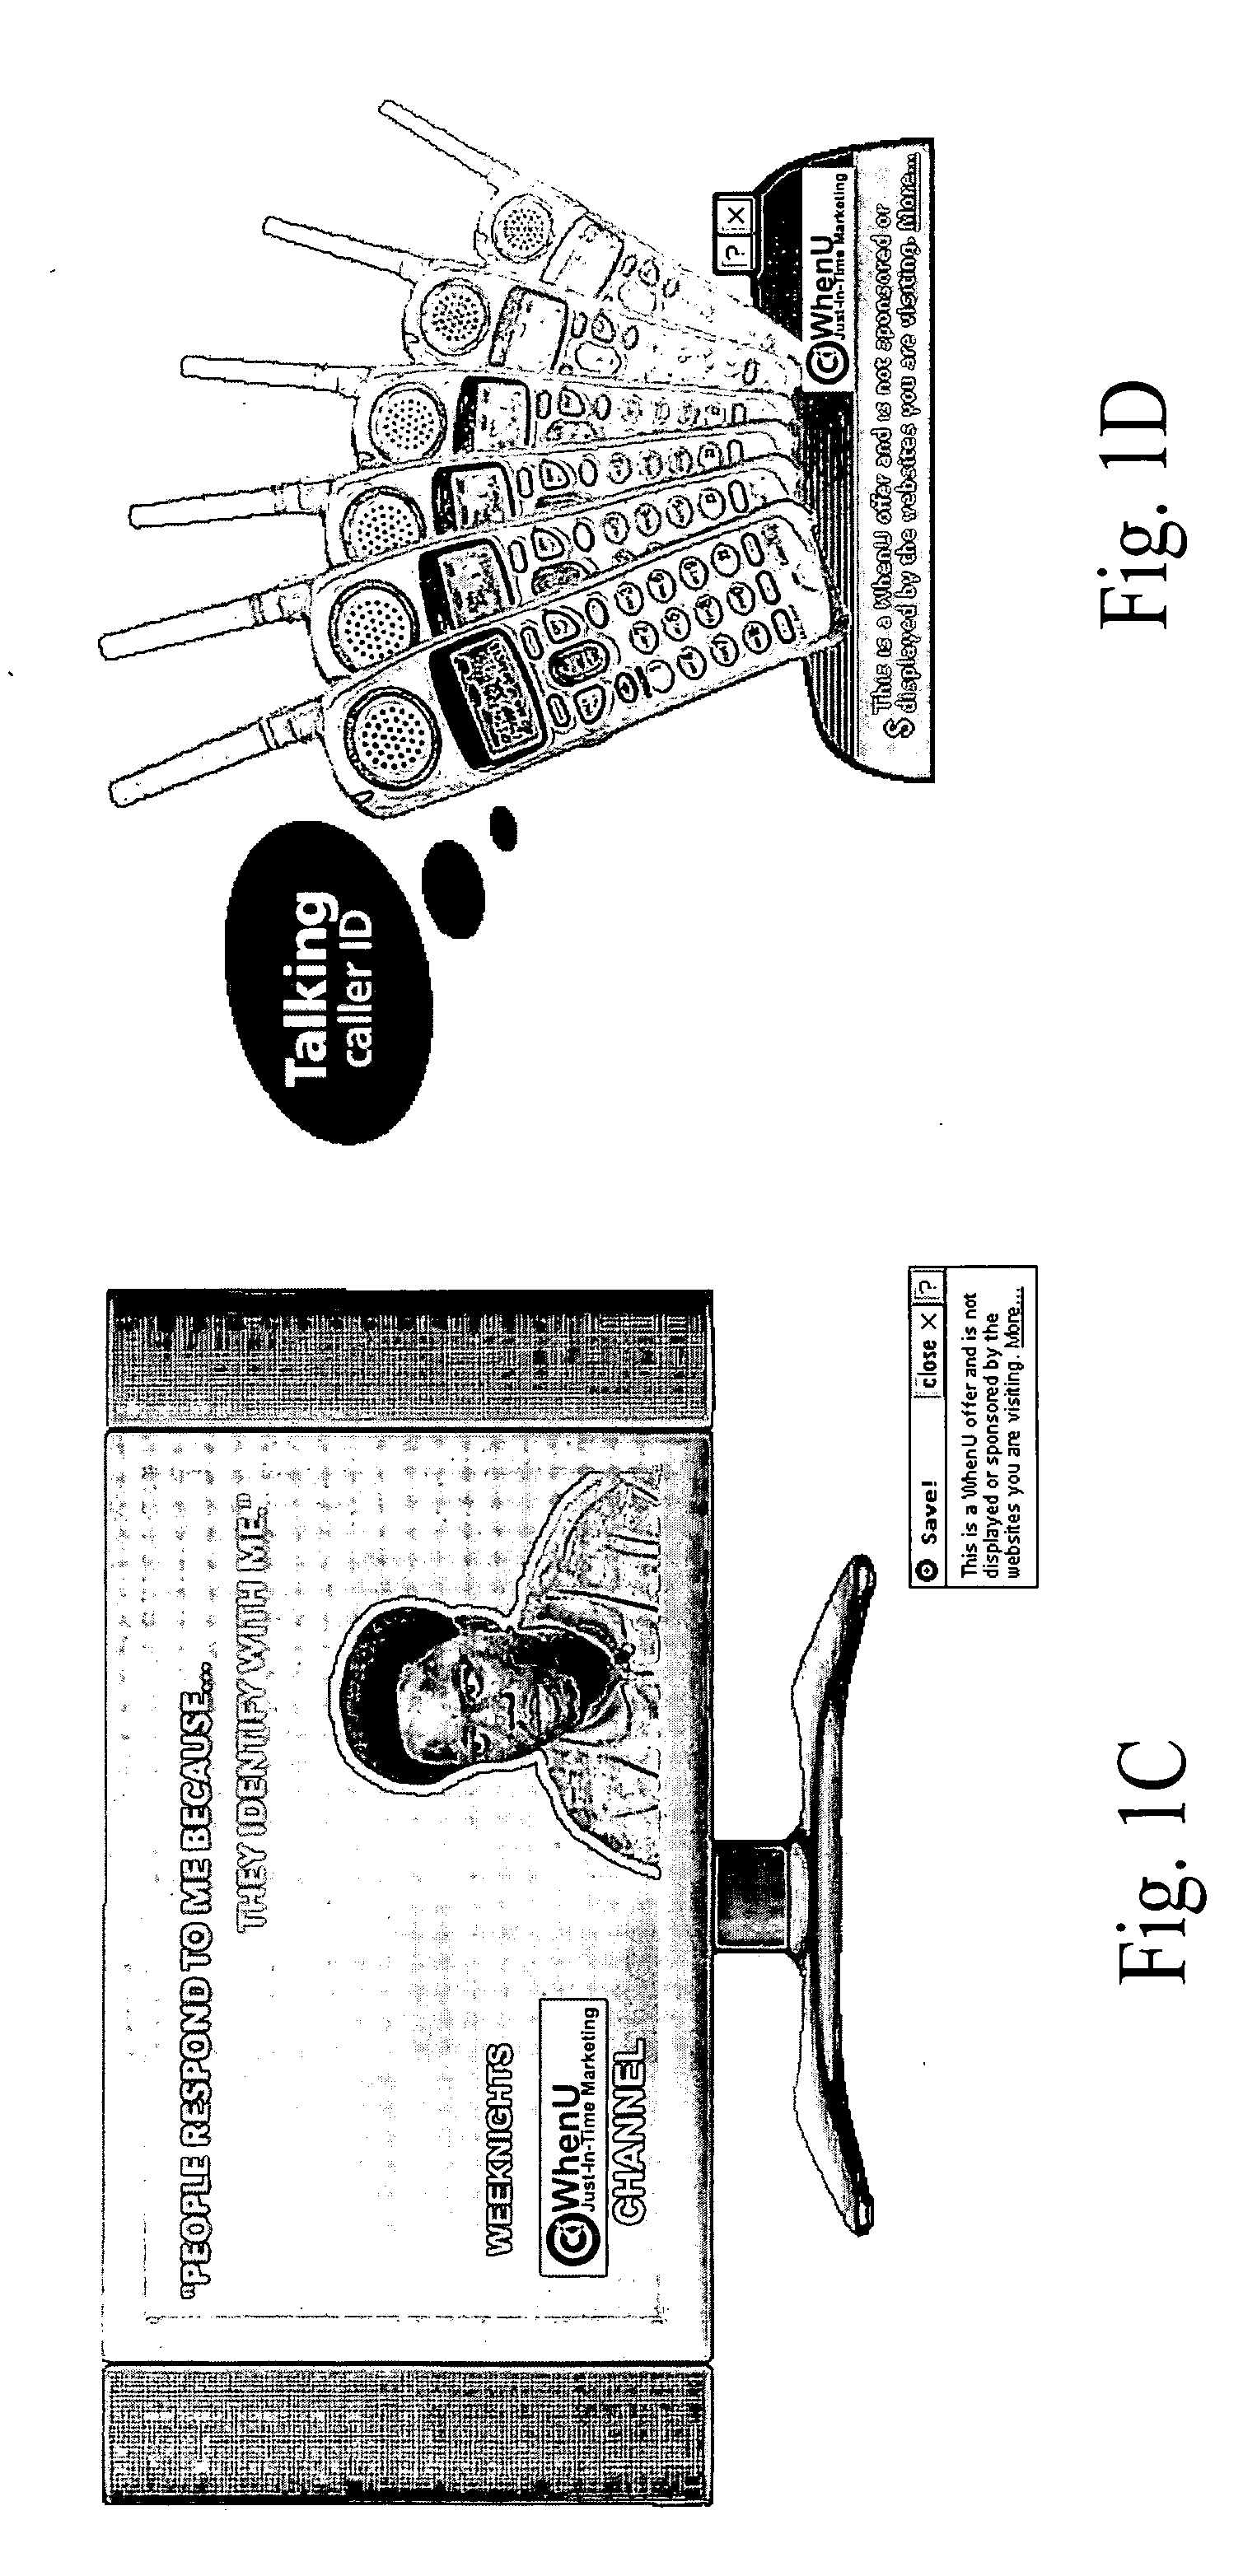 Techniques for remotely delivering shaped display presentations such as advertisements to computing platforms over information communications networks